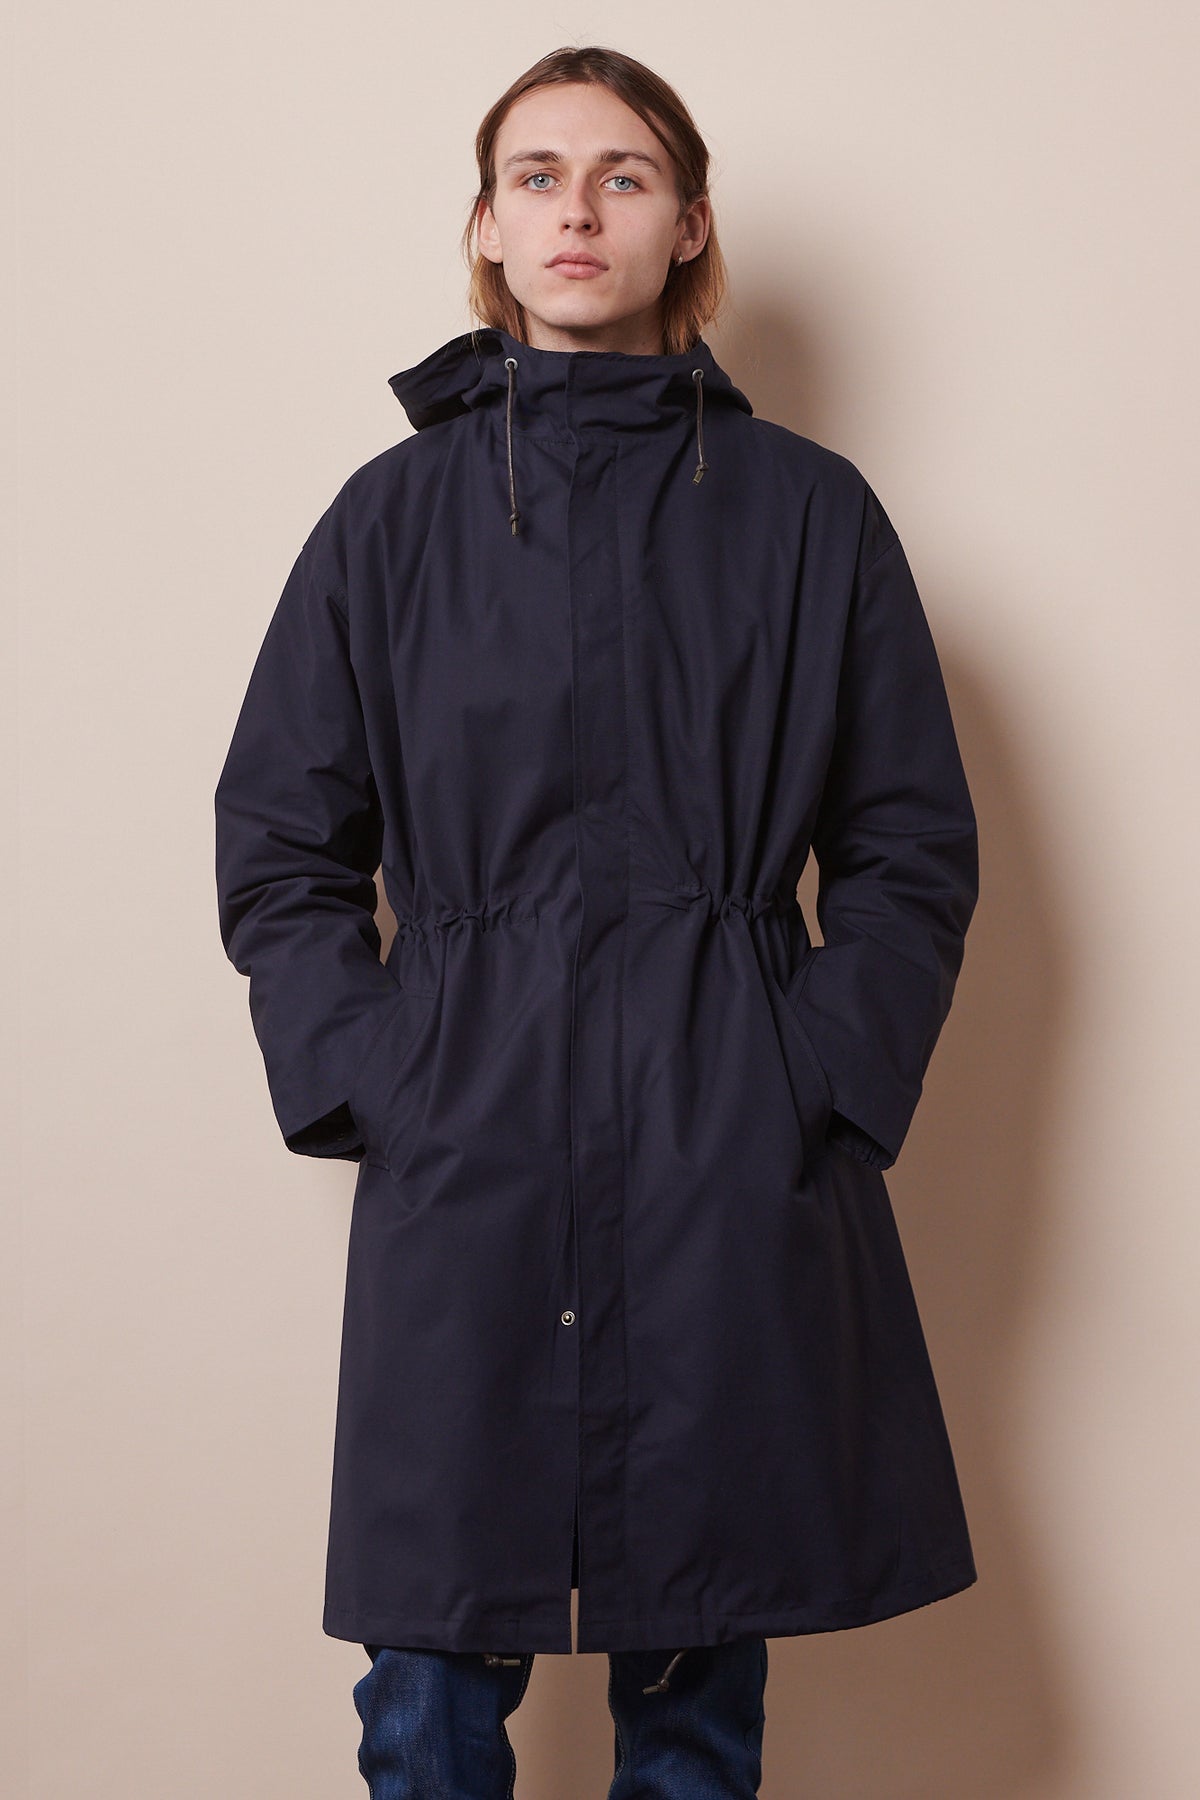 
            Knee up image of the front of male wearing zipped parka in navy with hands in front pockets. 